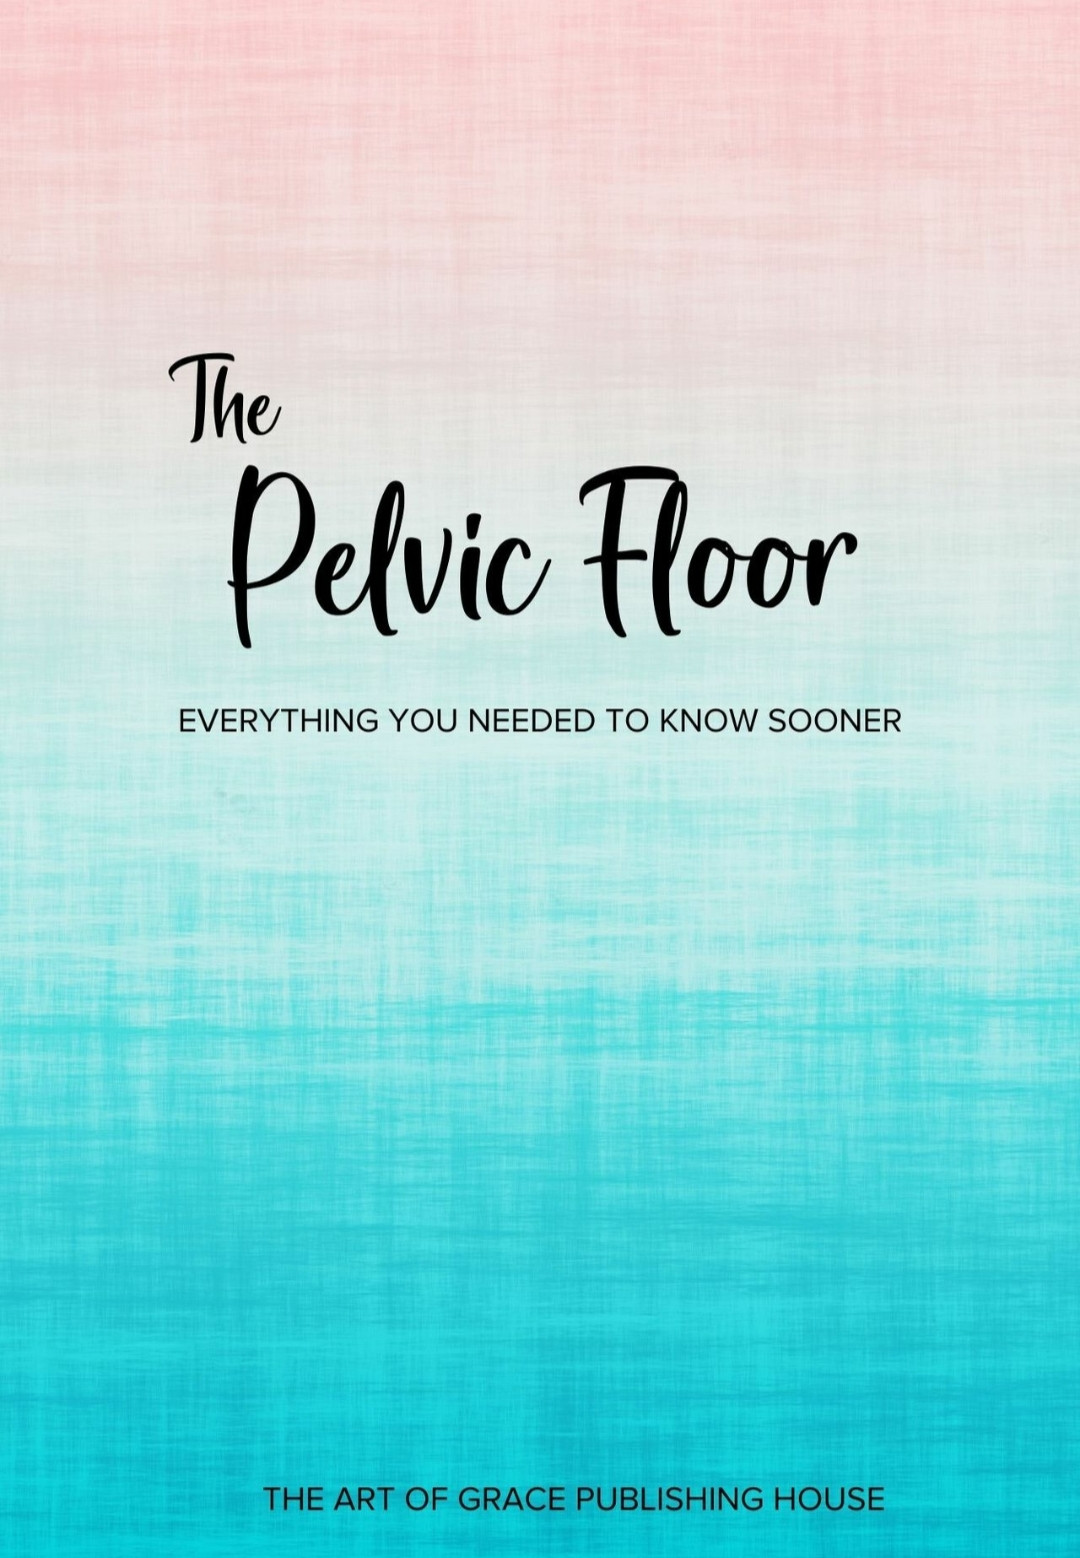 The Pelvic Floor: Everything You Needed To Know Sooner